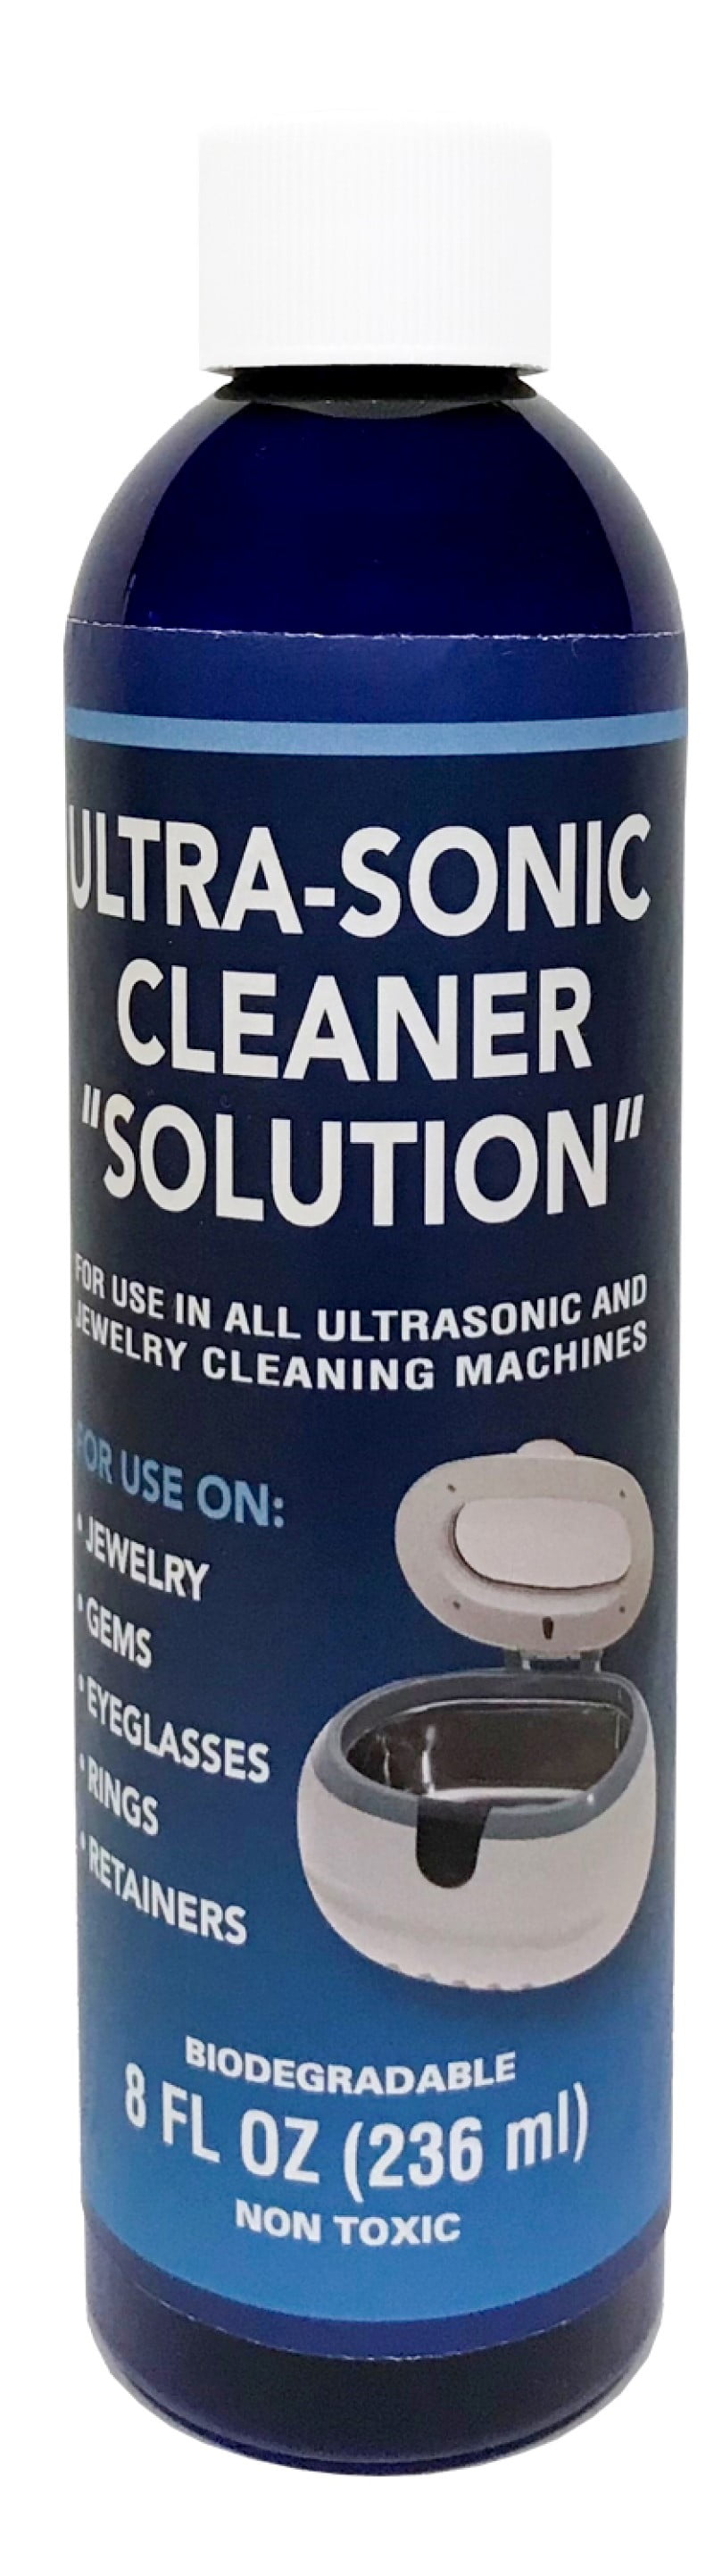 NORTHWEST ENTERPRISES Ultrasonic Jewelry Cleaner - Cleaning Solution for  Gold, Platinum Diamonds and Non-Porous Precious & Semi-Precious Jewelry (8